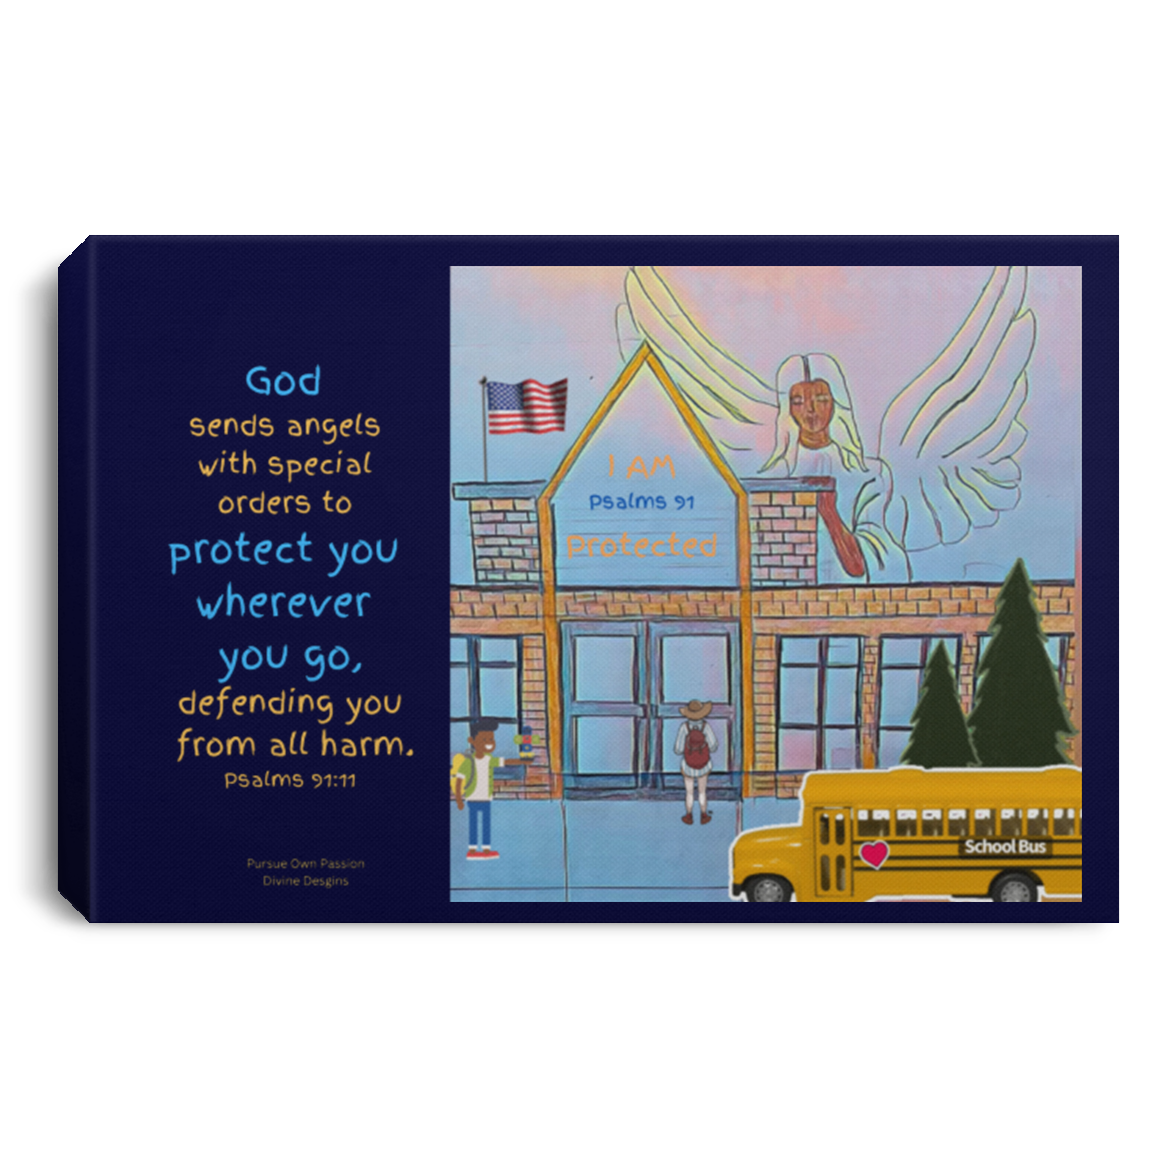 Protection for our children Landscape Canvas .75in Frame